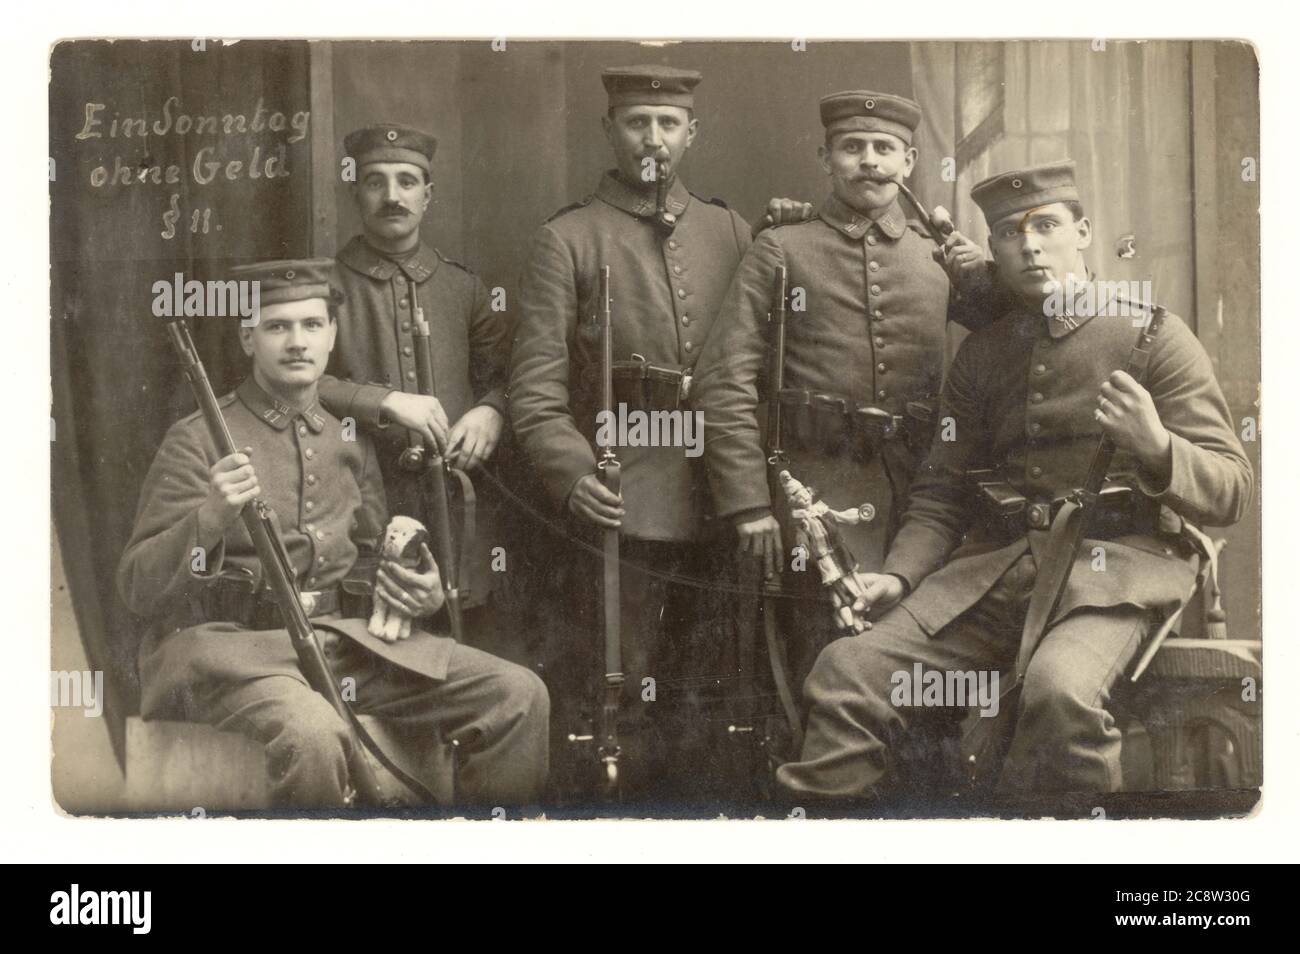 WW1 era postcard of German infantry soldiers with toy mascots holding rifles, wearing field caps (kratzchen)  - inscribed is 'one Sunday without money', enjoying a day's leave having a photo taken with comrades, Prussian army, possibly 7th division, German Empire 1914-1918 Stock Photo